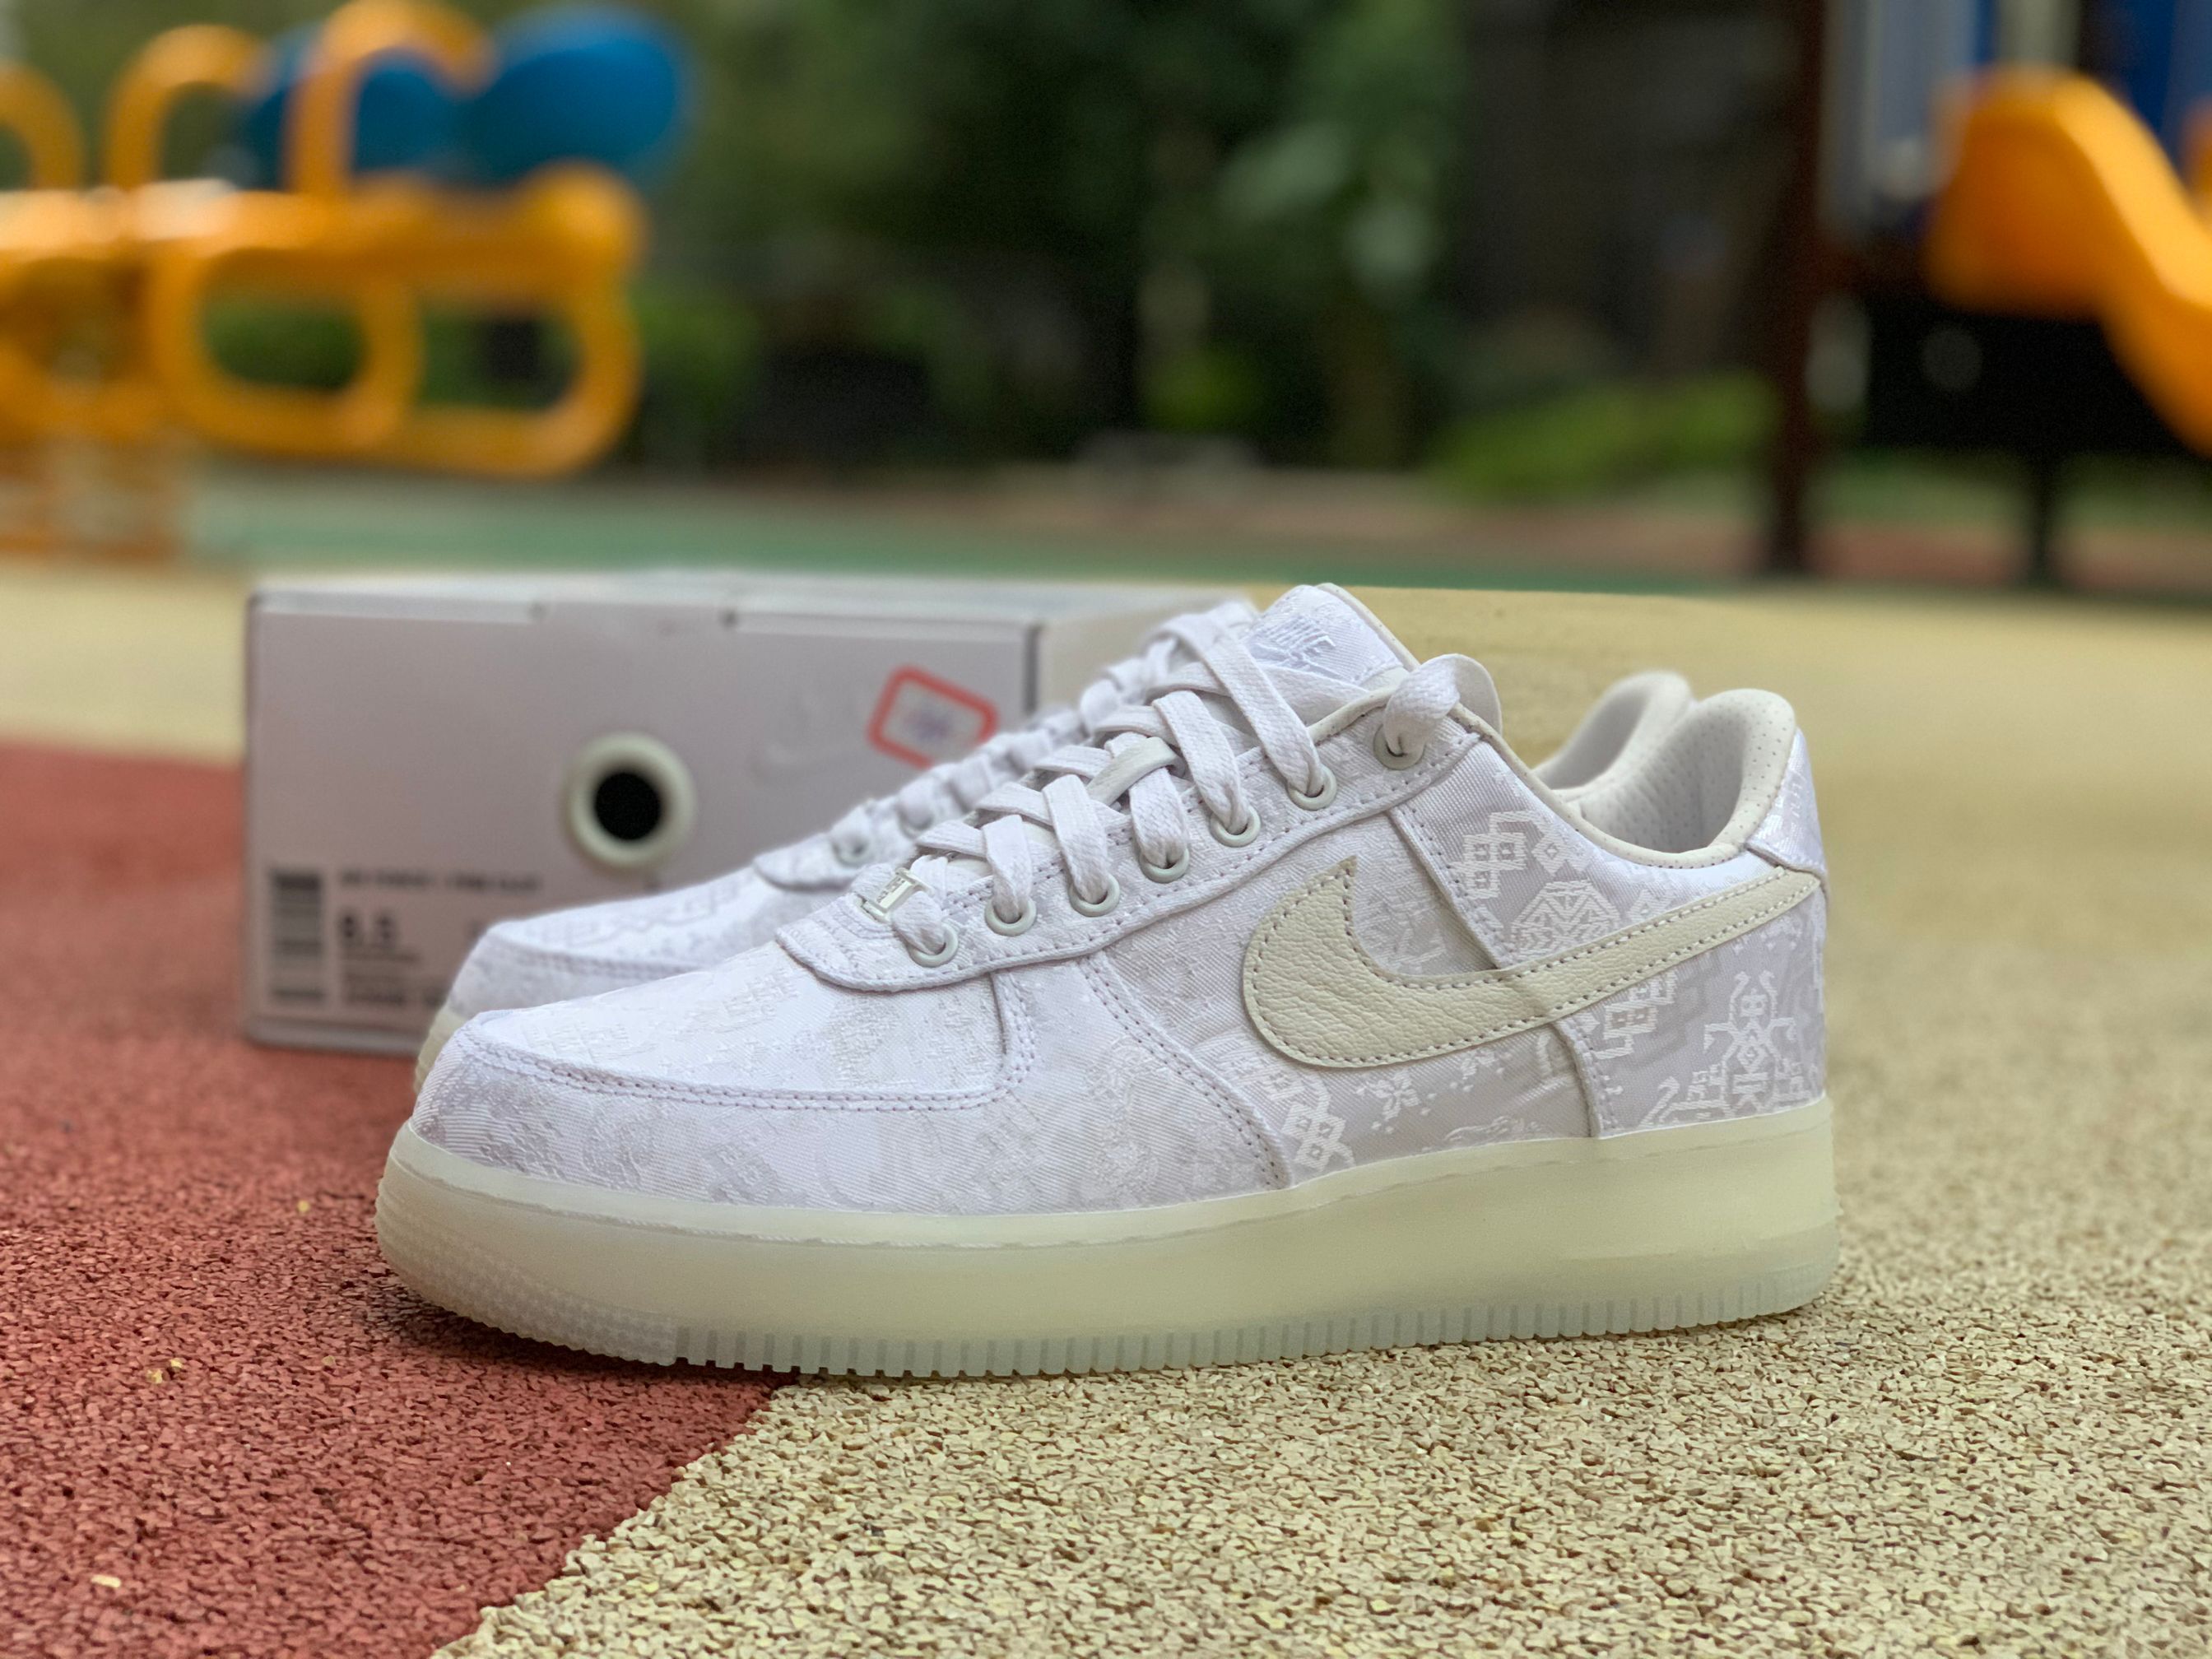 100 Latest Release - air max size 15 wide tires - CLOT x Nike Air Force 1 Premium 'CLOT' AO9286